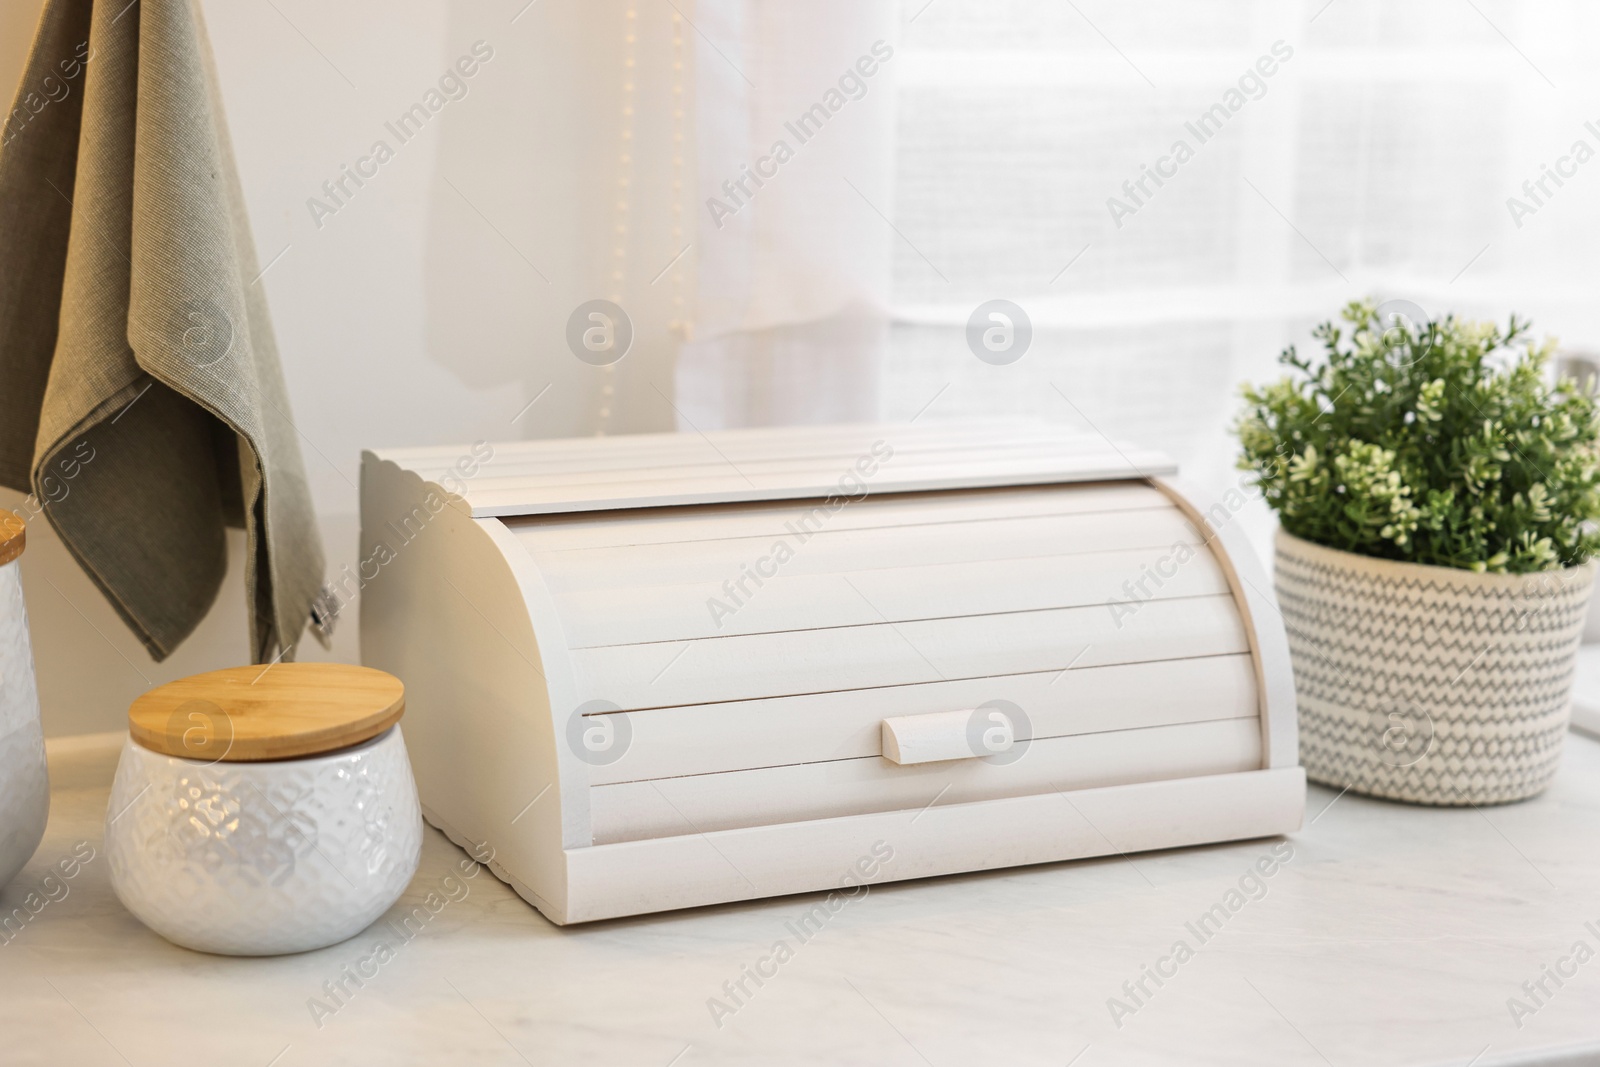 Photo of Wooden bread box and decorative elements on white countertop in kitchen